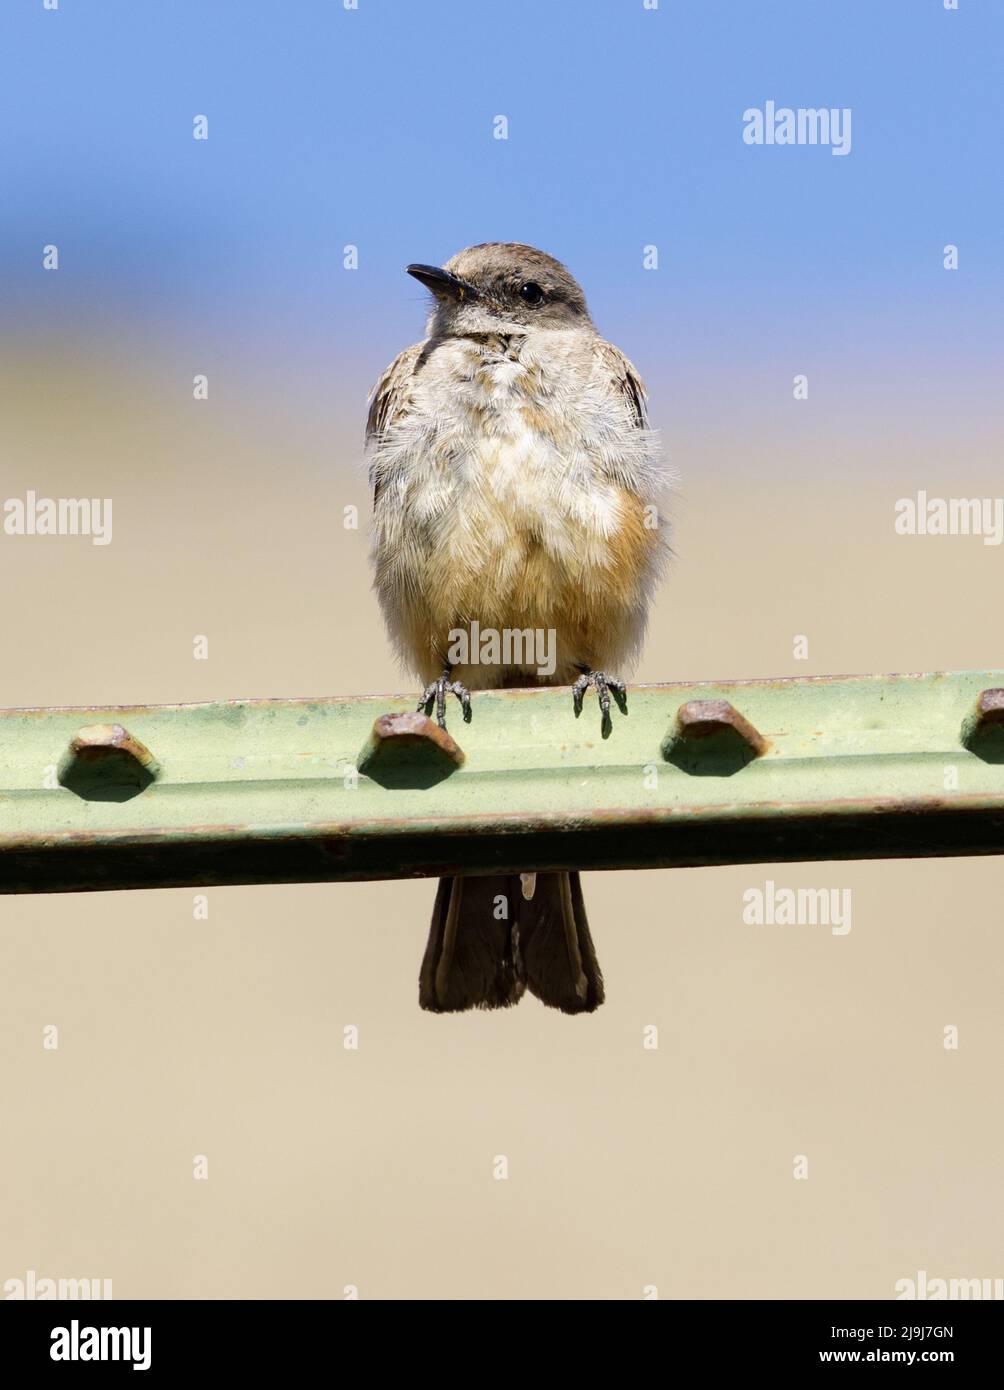 Juvenile Say's Phoebe perched on fence. Mission Peak Regional Preserve, Alameda County, California, USA. Stock Photo